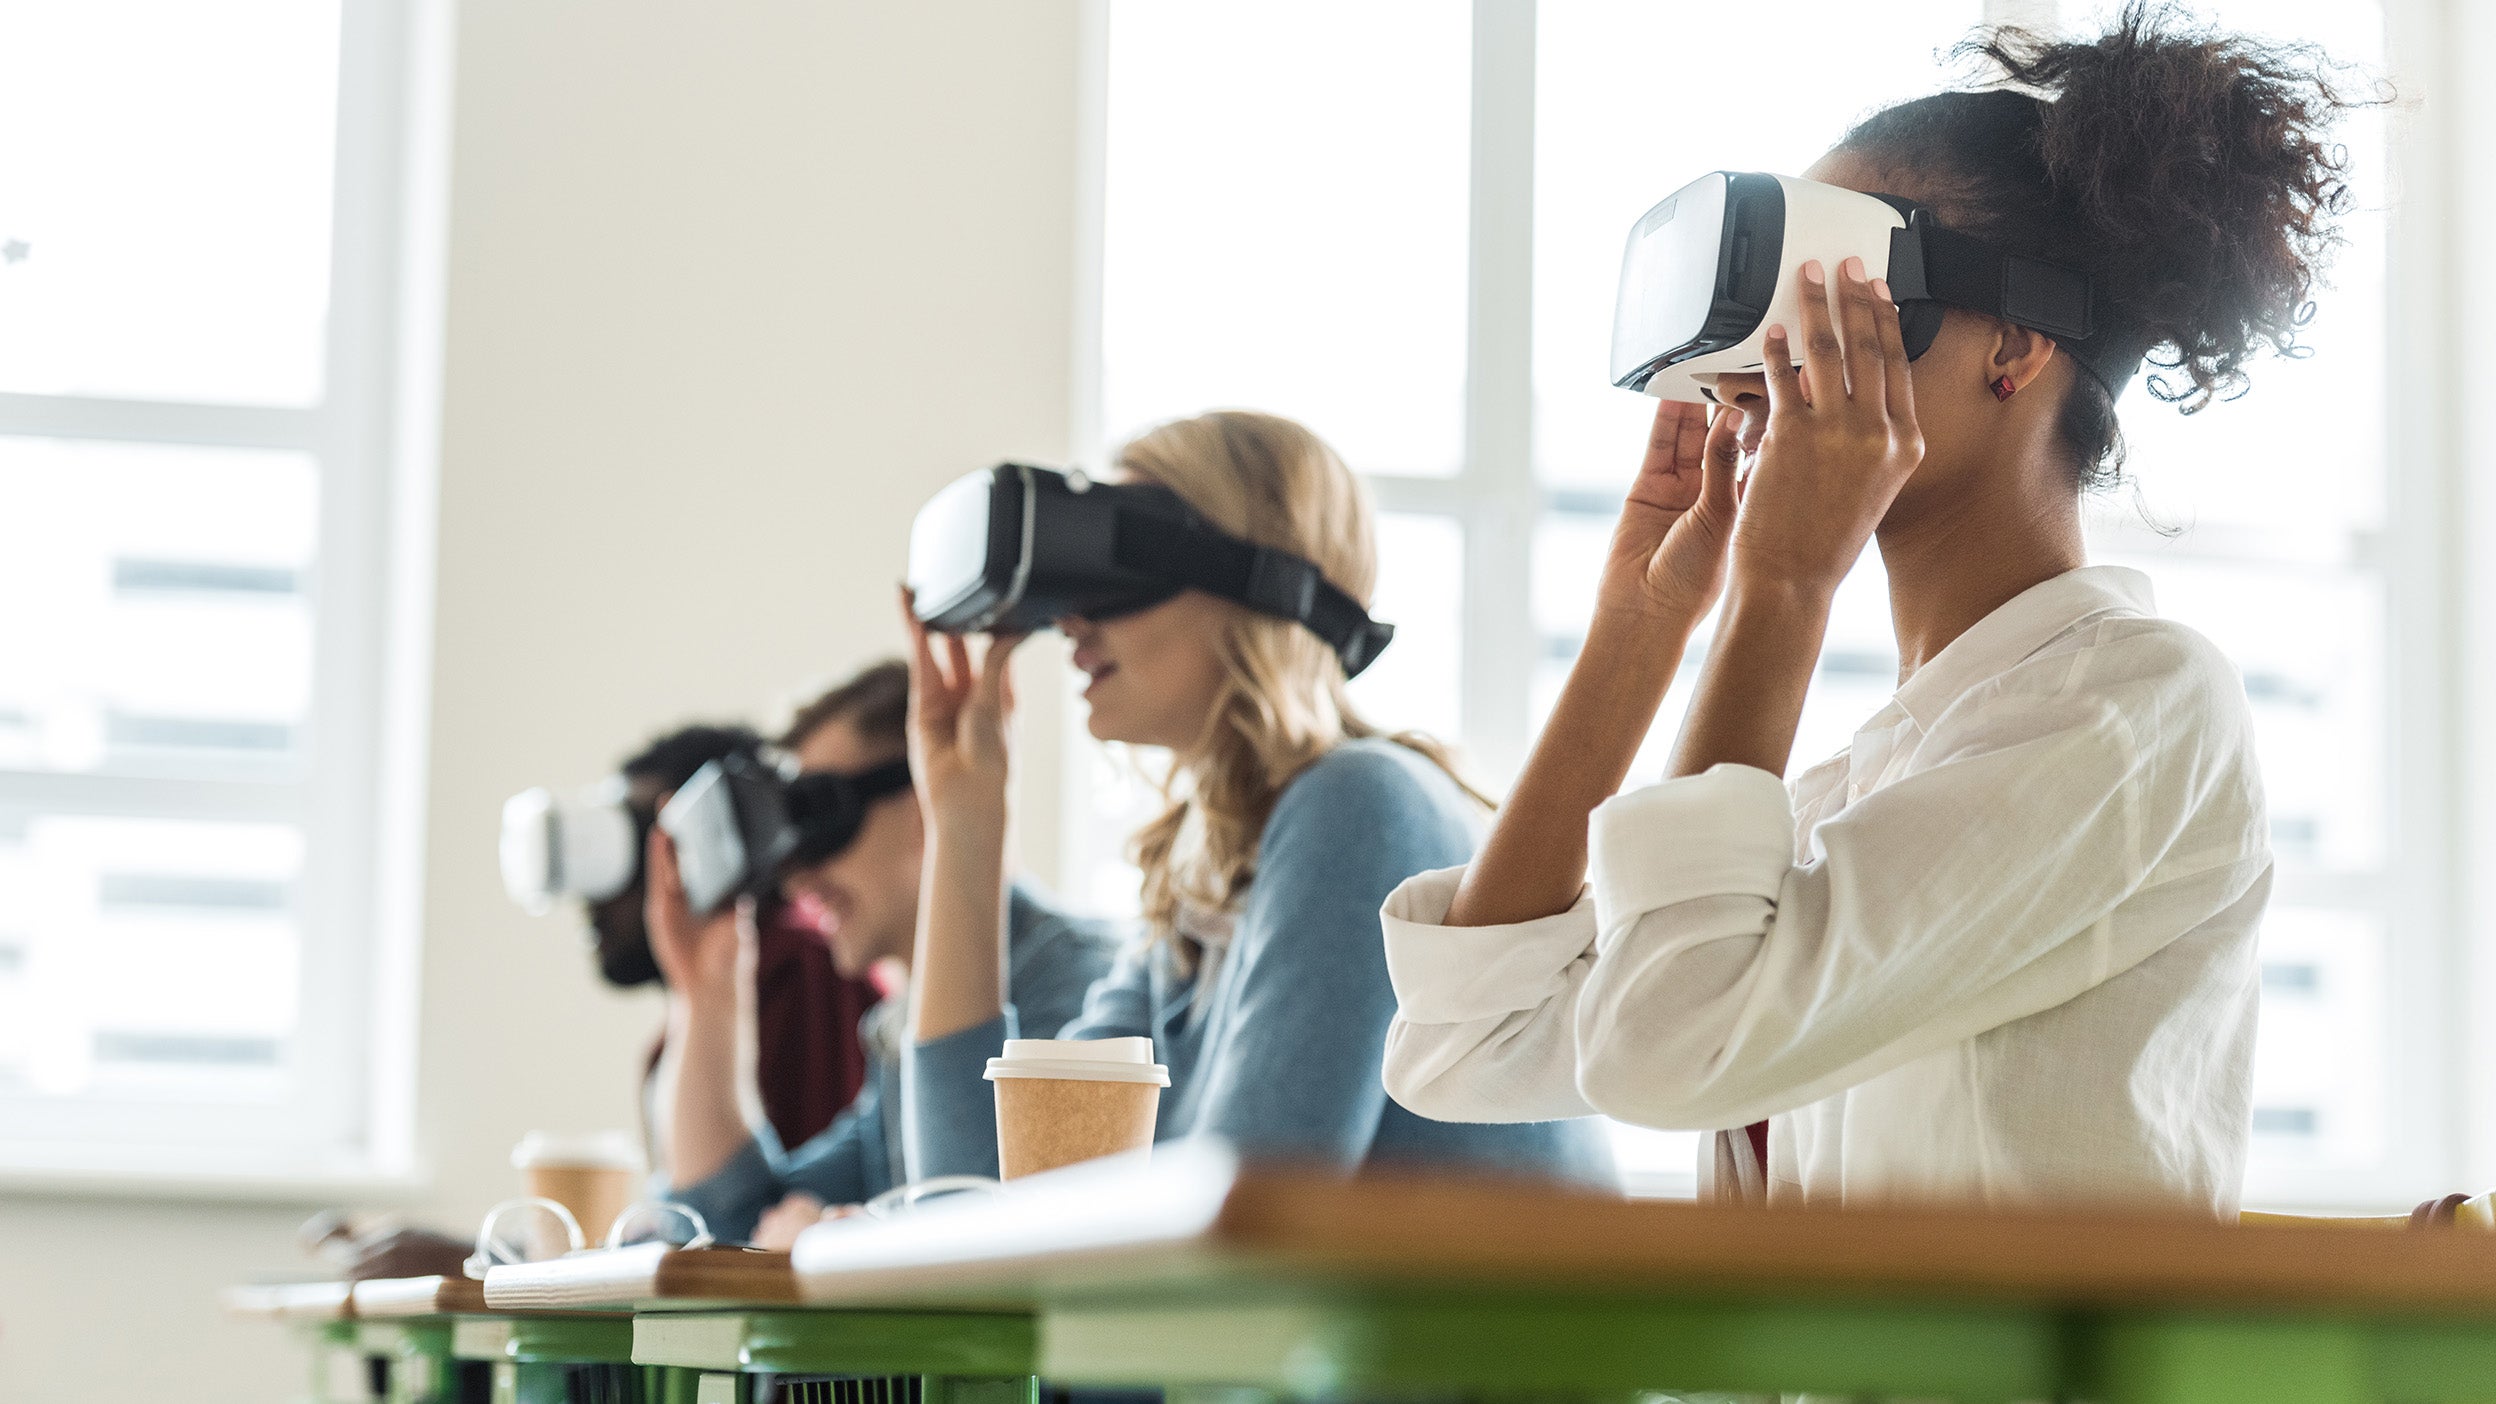 Classroom of people using virtual reality devices